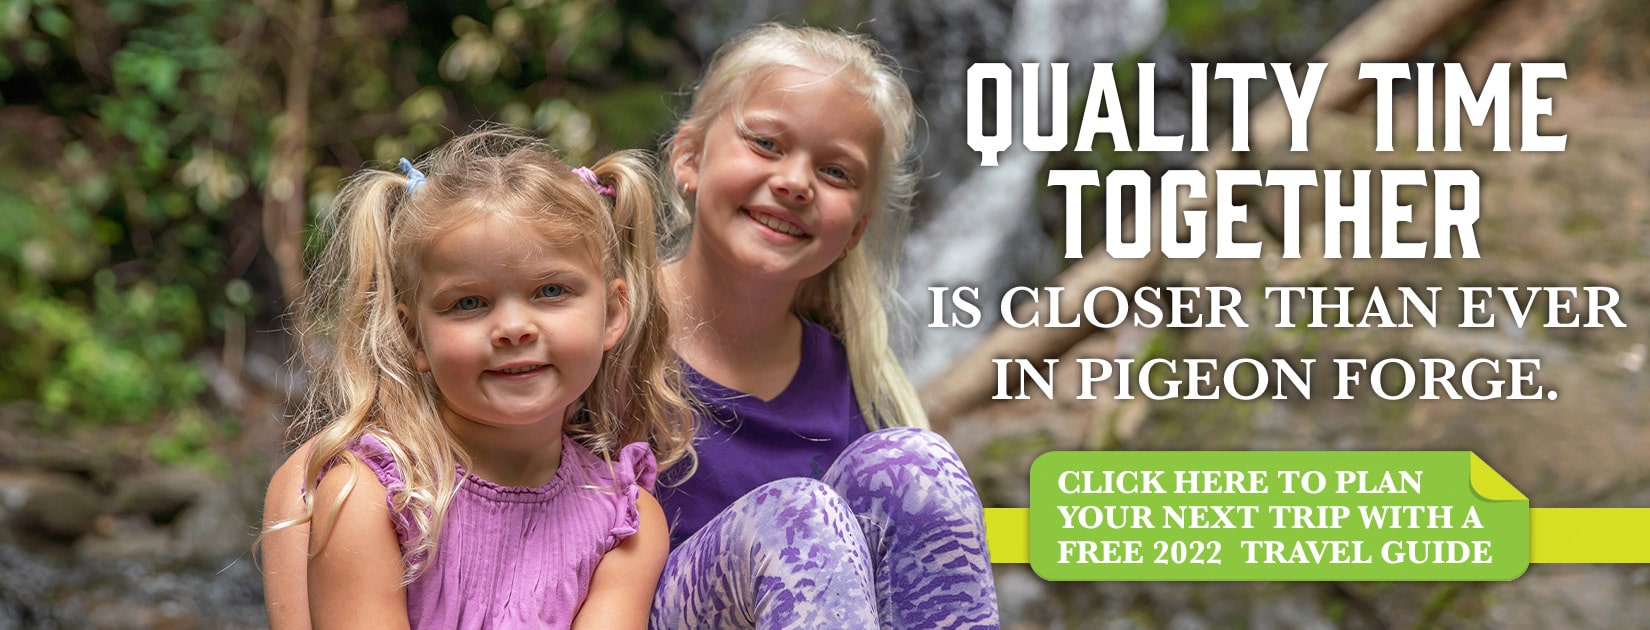 Quality Time together is closer than ever in Pigeon Forge.